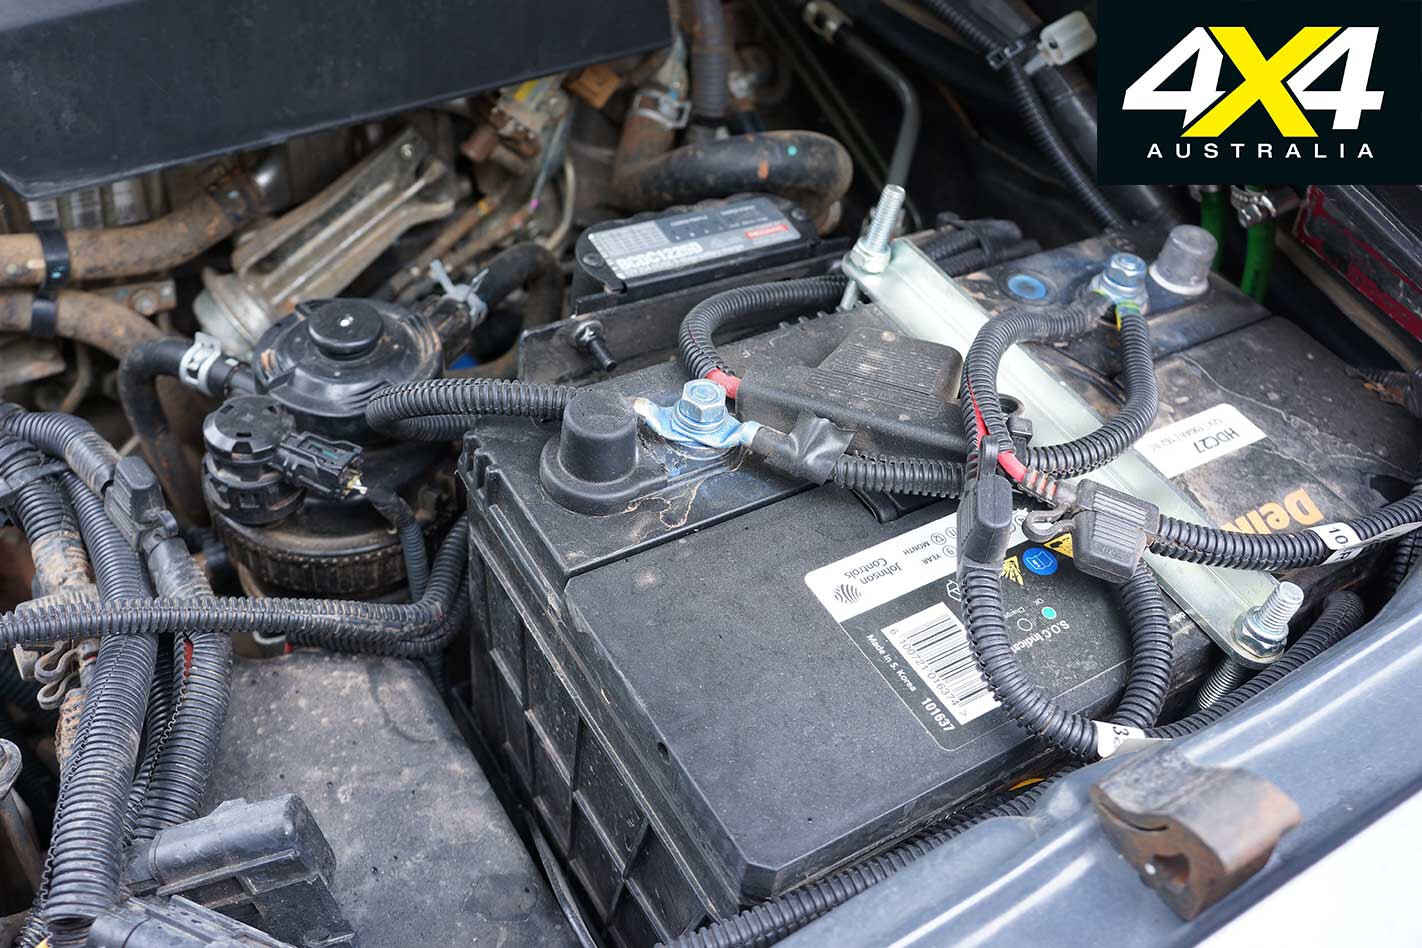 Archive Whichcar 2019 01 23 Misc 2015 Toyota Hilux 3 0 TD Battery